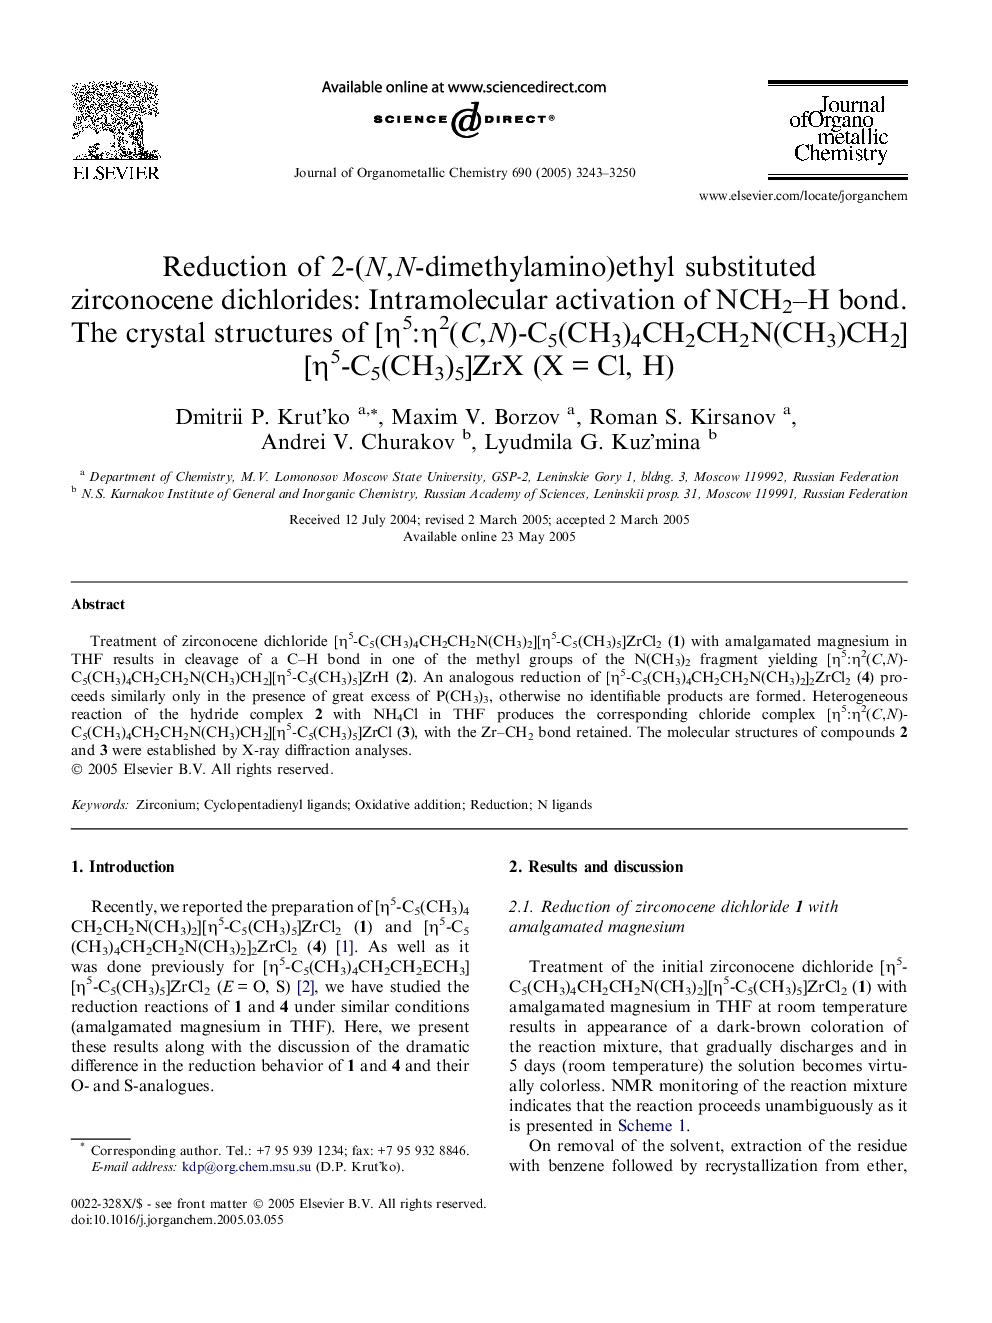 Reduction of 2-(N,N-dimethylamino)ethyl substituted zirconocene dichlorides: Intramolecular activation of NCH2-H bond. The crystal structures of [Î·5:Î·2(C,N)-C5(CH3)4CH2CH2N(CH3)CH2][Î·5-C5(CH3)5]ZrX (XÂ =Â Cl, H)